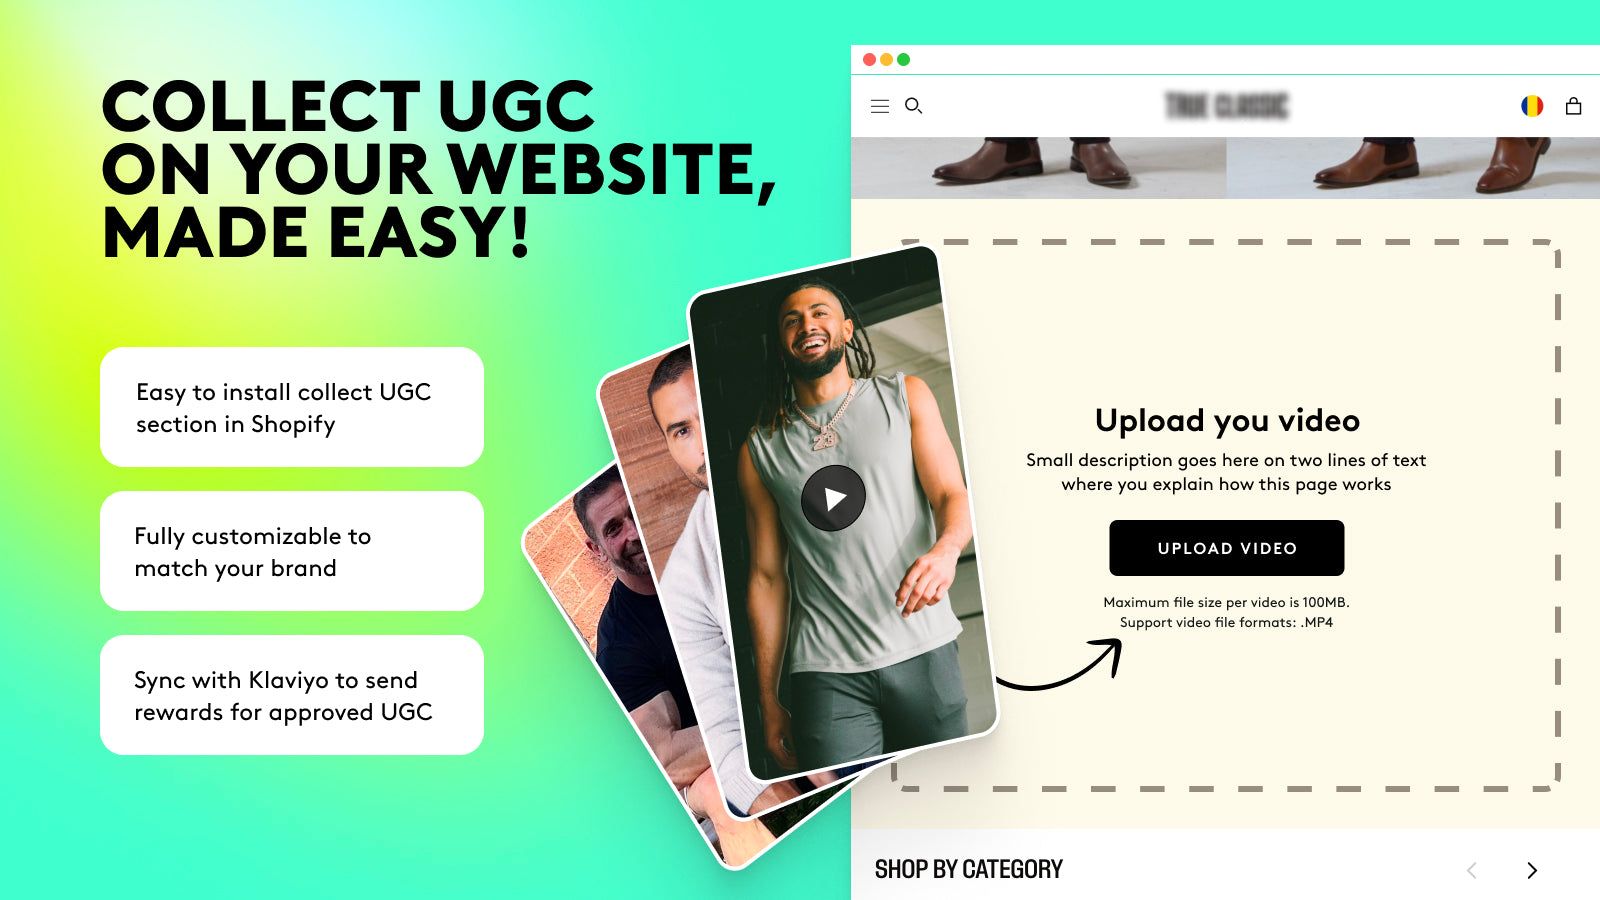 Collect UGC video, video upload, collect video, testimonials